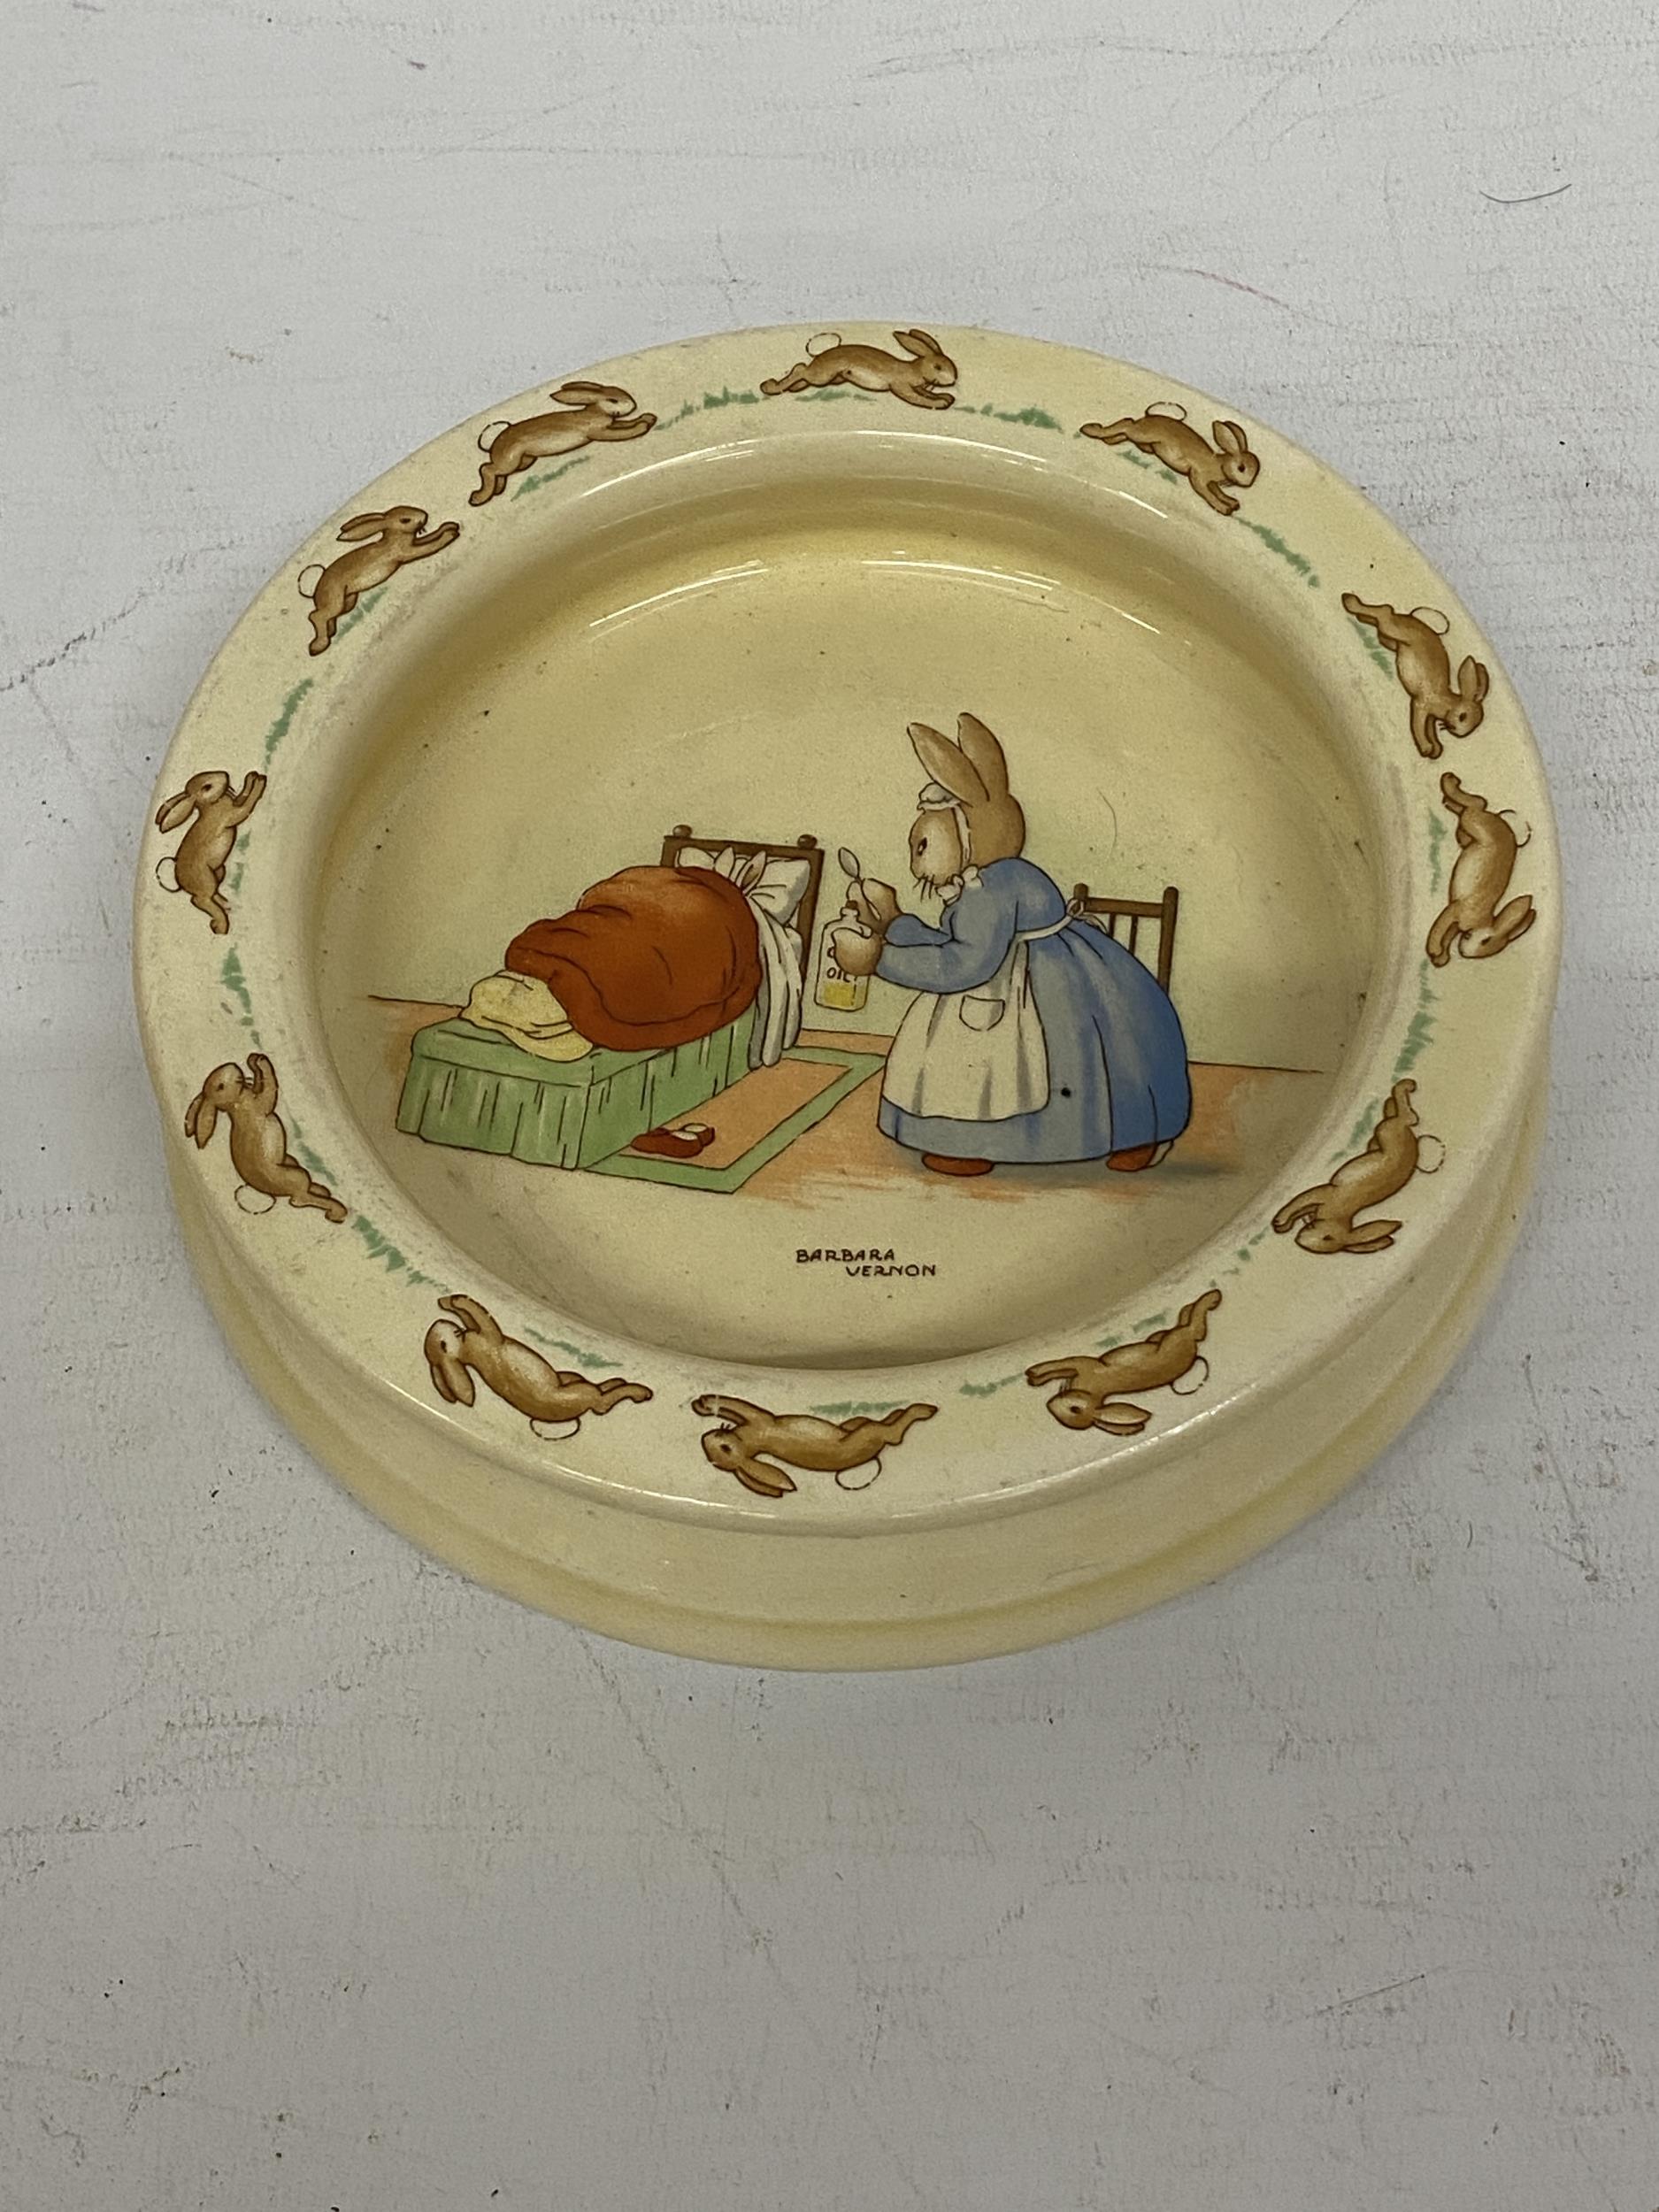 A ROYAL DOULTON BUNNYKINS DEEP IVORY GLAZED EARTHENWARE BABY PLATE "MEDICINE TIME" PRODUCED UNTIL